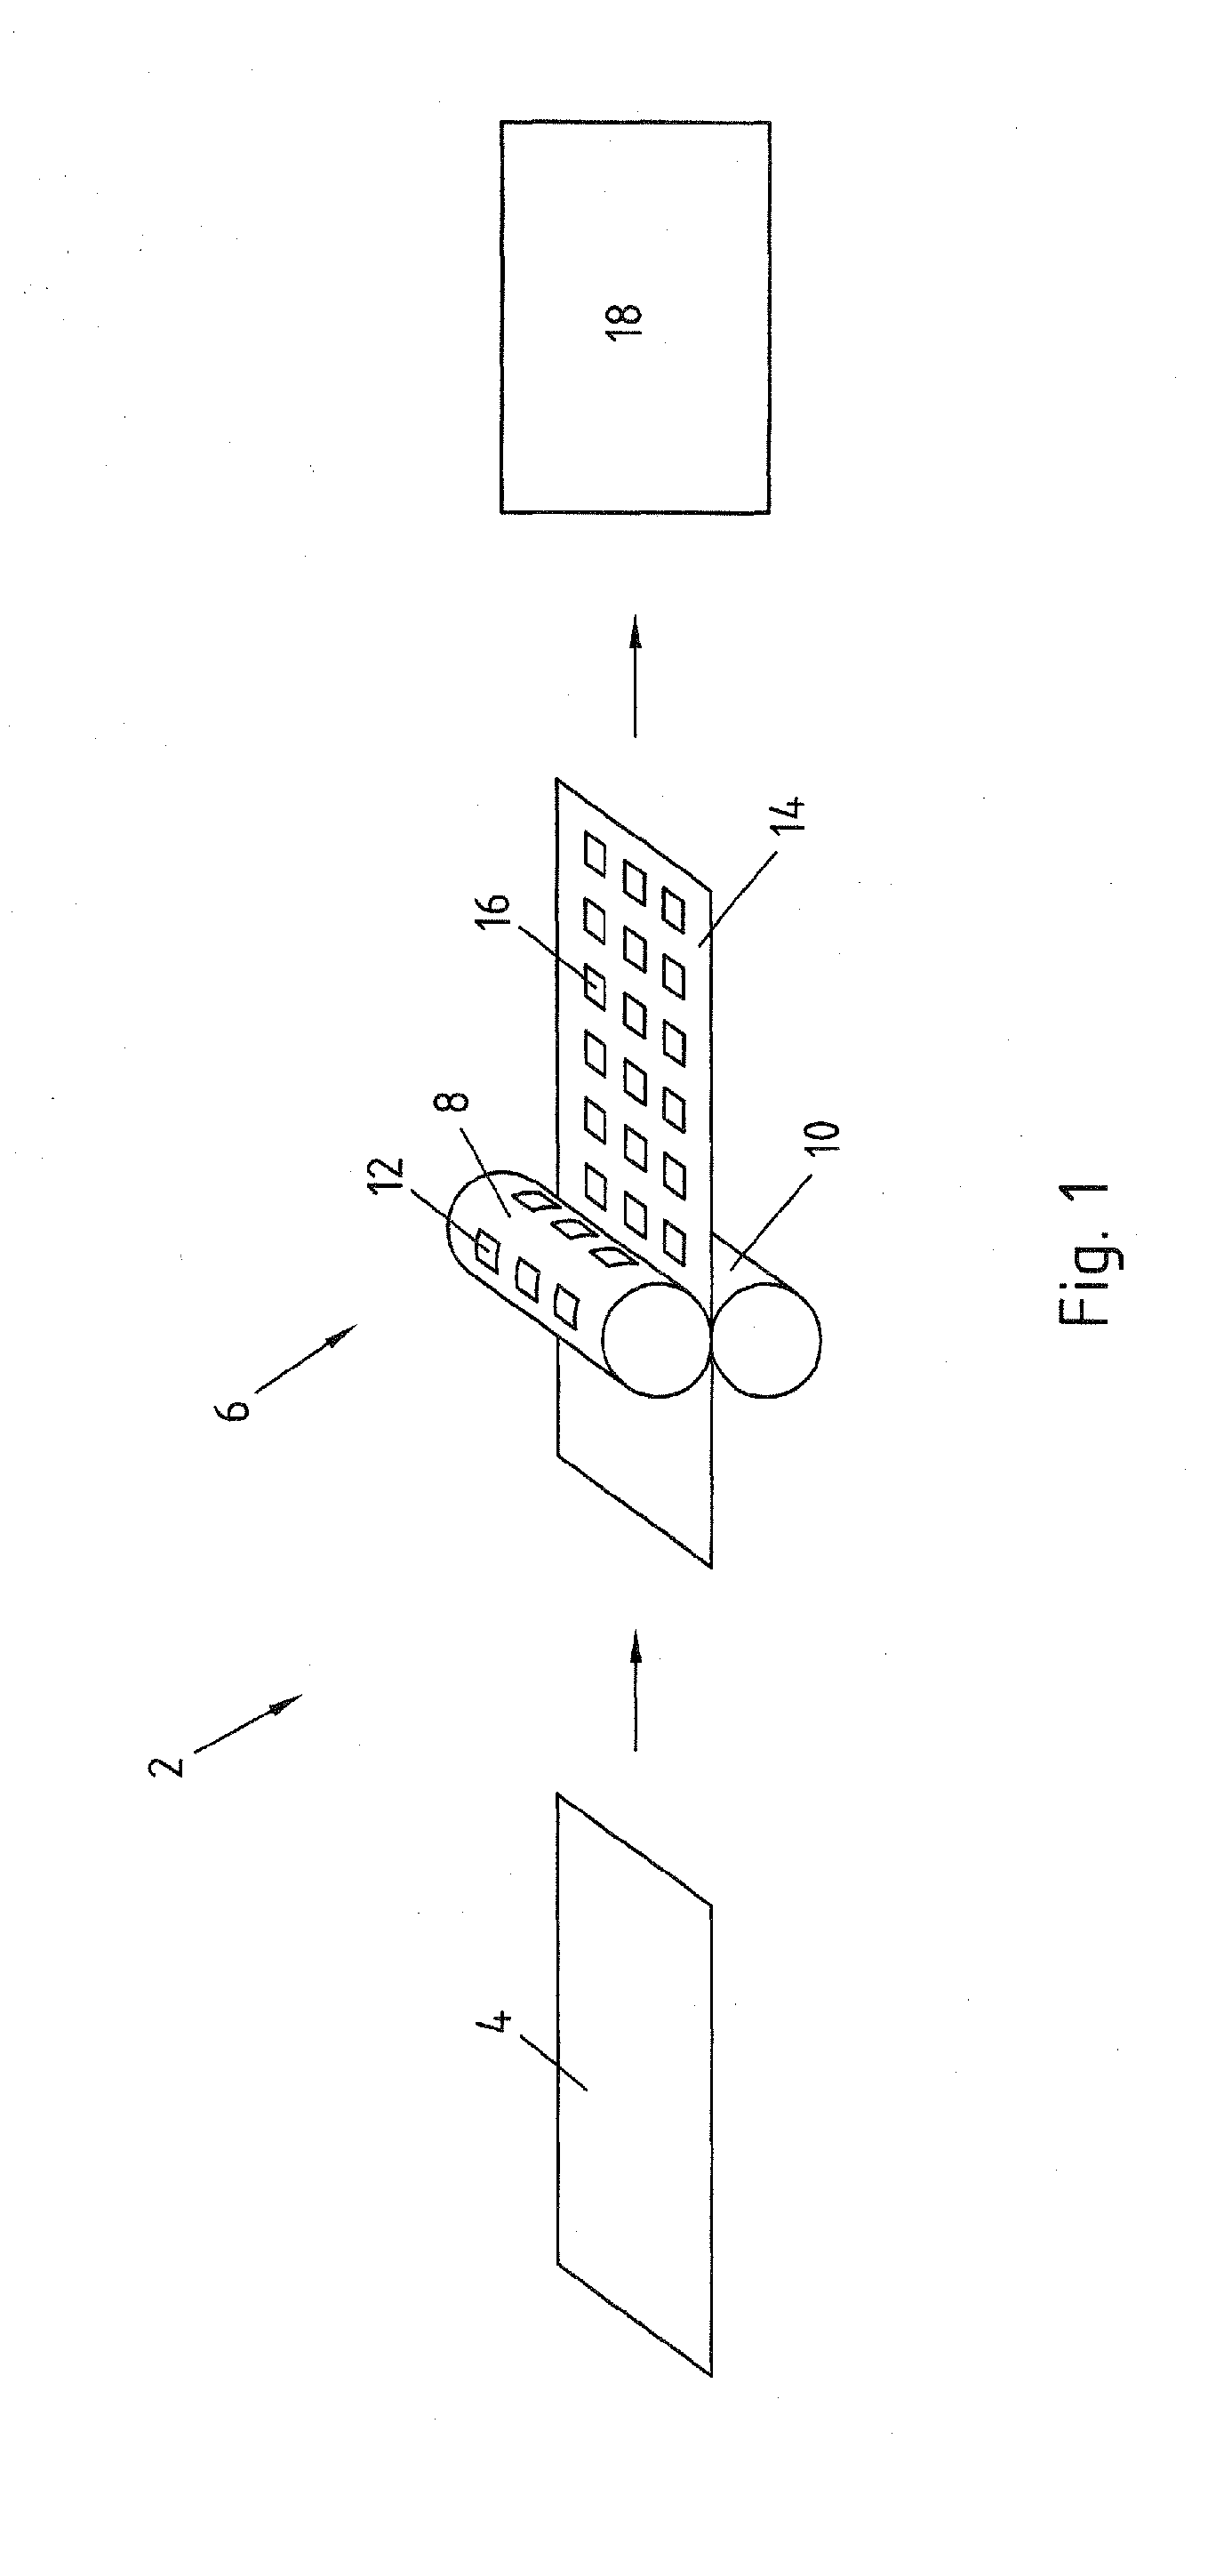 Method for Producing a Metal Component From A Hot-Stamped Raw Material